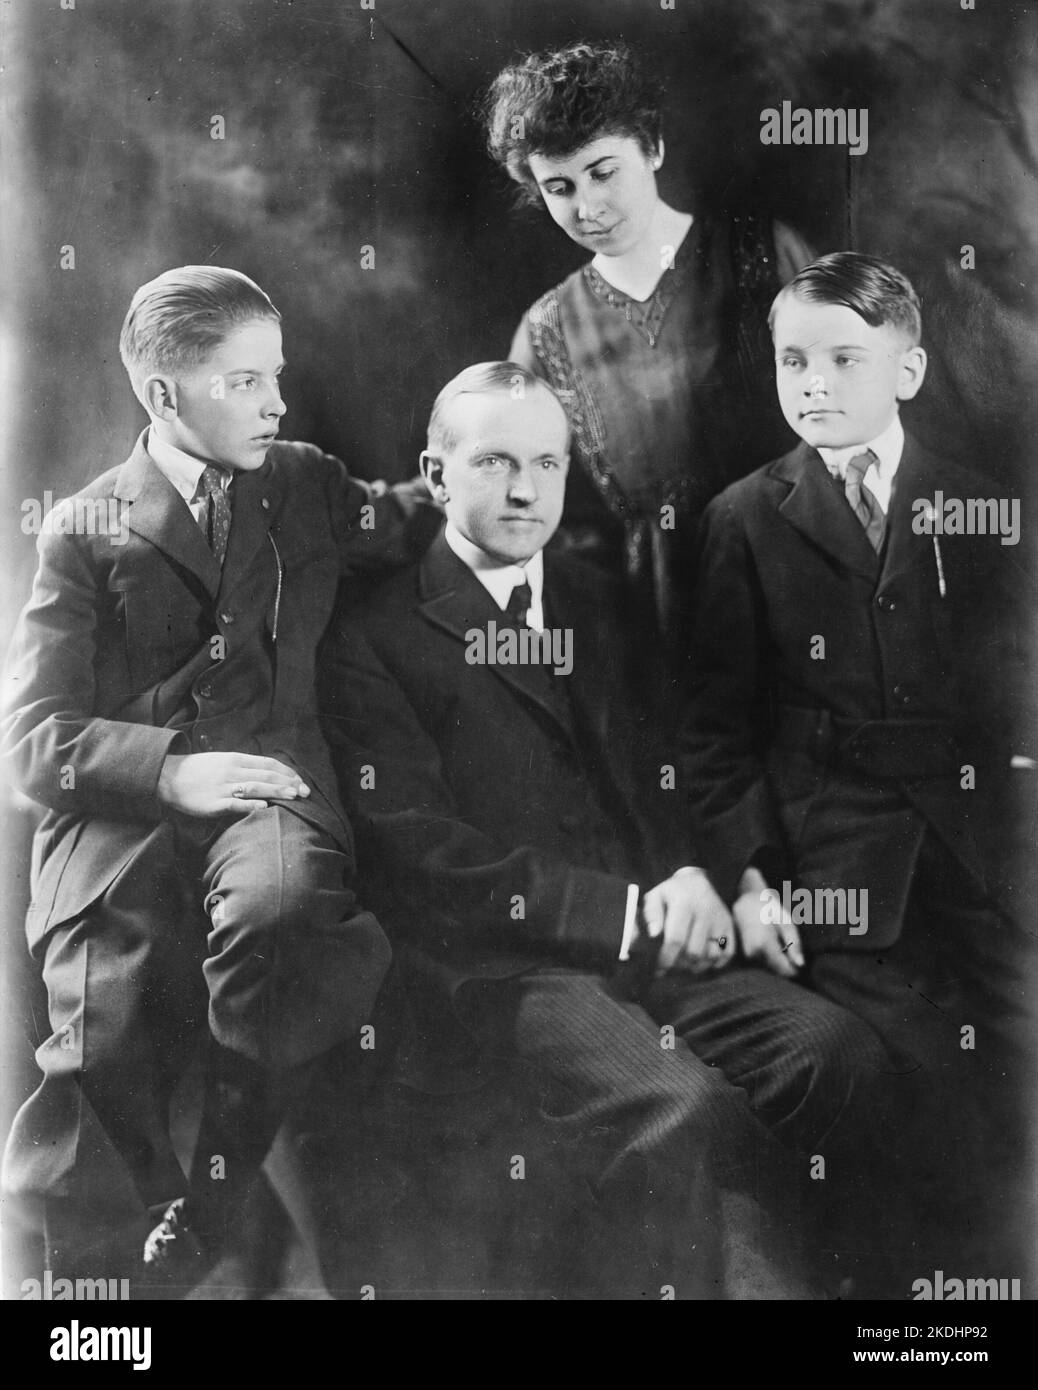 Coolidge with his family - his wife Grace and his two sons John (on the left) and Calvin Jr. Calvin Jr was to die at 16 yrs old, from sepsis and blood poisoning following an infection in a blister on his toes that he got from playing tennis with no socks on. President Coolidge never forgave himself for the death of his youngest son. Stock Photo